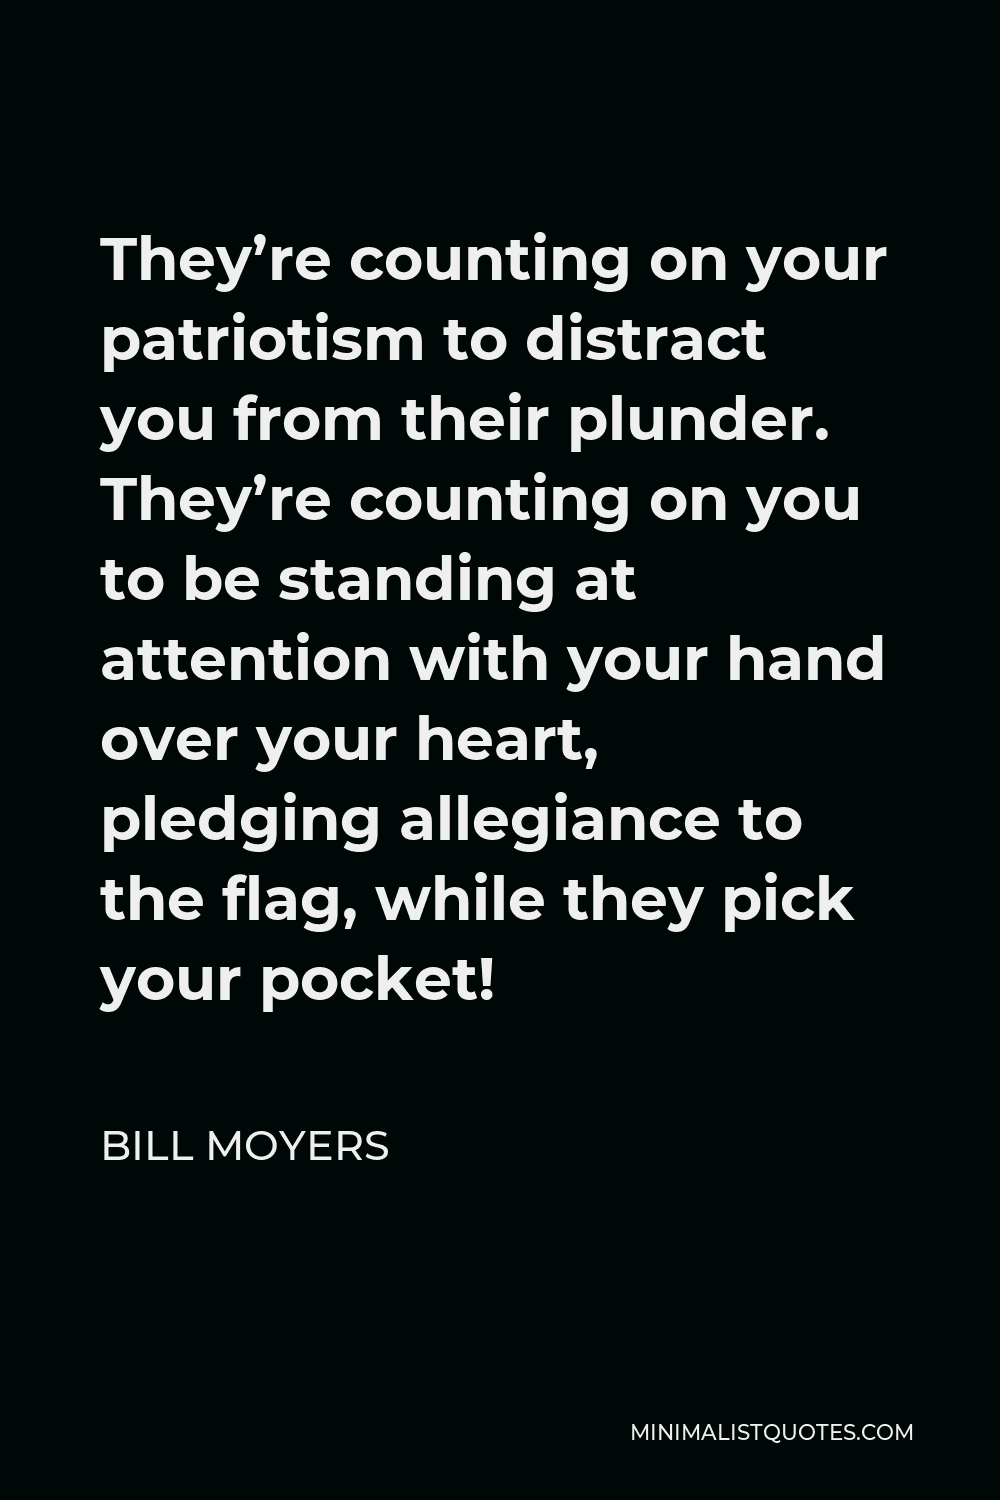 Bill Moyers Quote - They’re counting on your patriotism to distract you from their plunder. They’re counting on you to be standing at attention with your hand over your heart, pledging allegiance to the flag, while they pick your pocket!